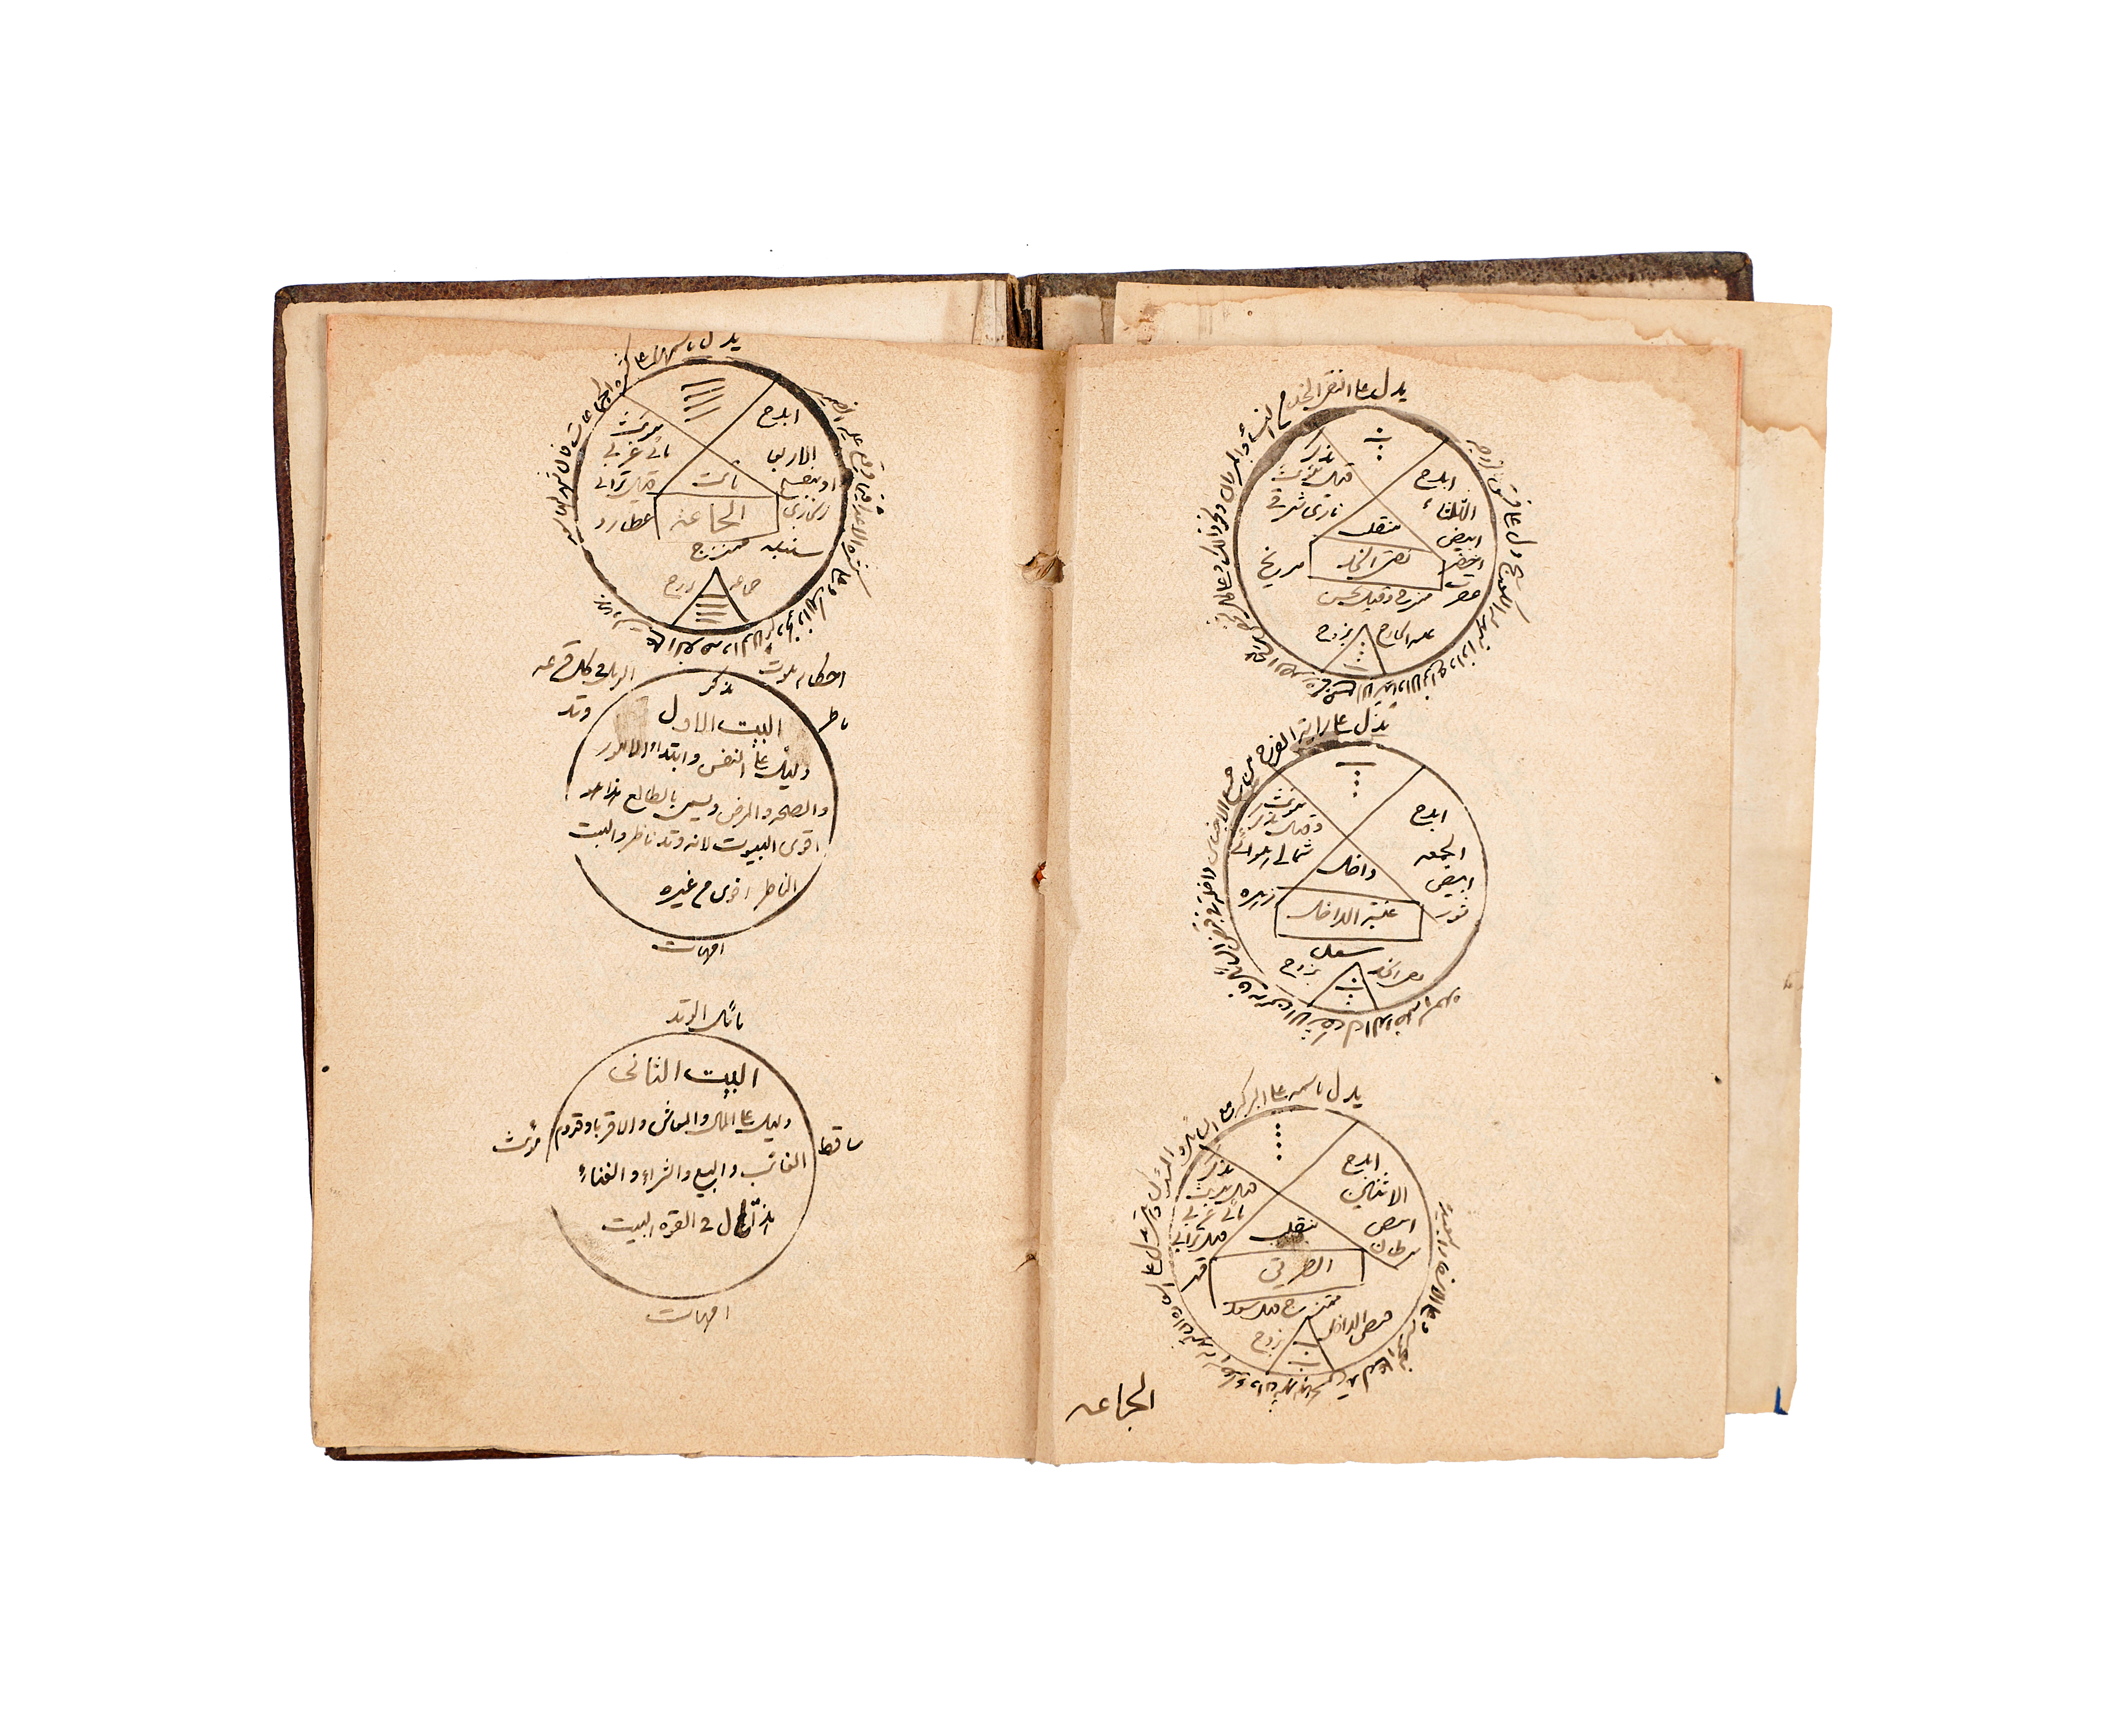 A BOOK ON ASTRONOMY & INSTRUCTIONS HOW TO USE ASTROLABE, 17TH CENTURY, PERSIA